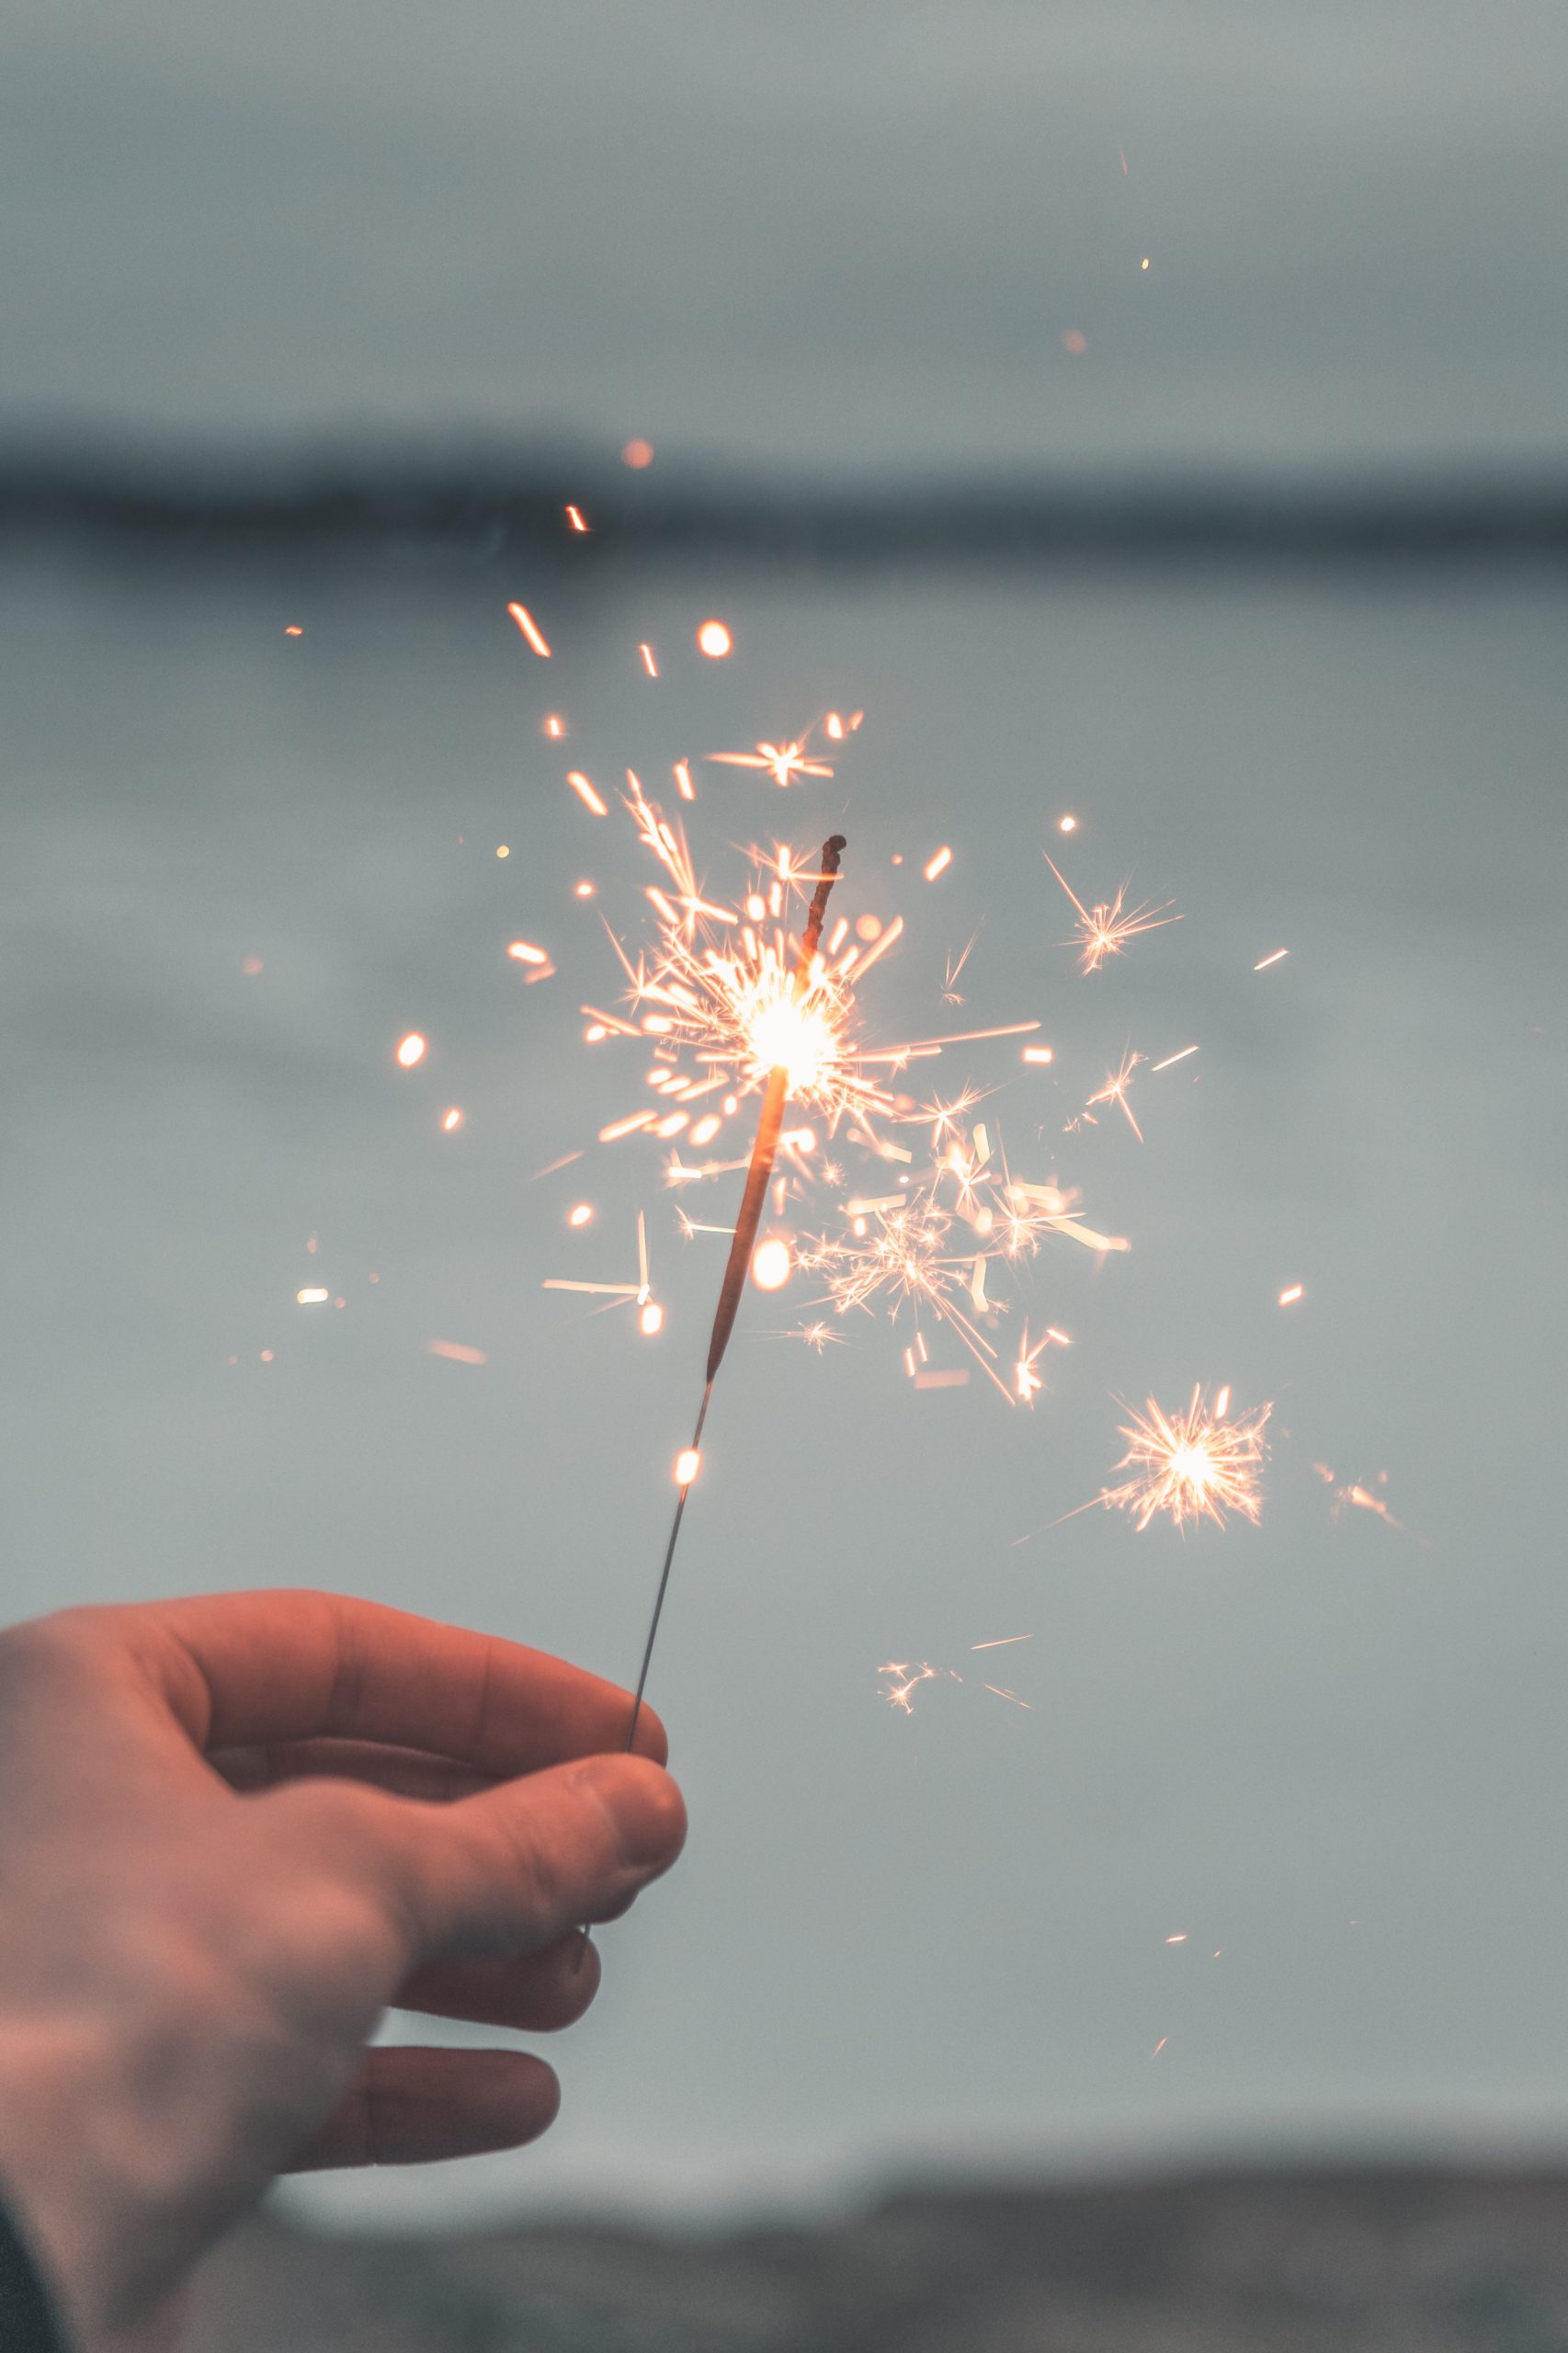 man's hand holding lit sparkler at twilight with blurred background